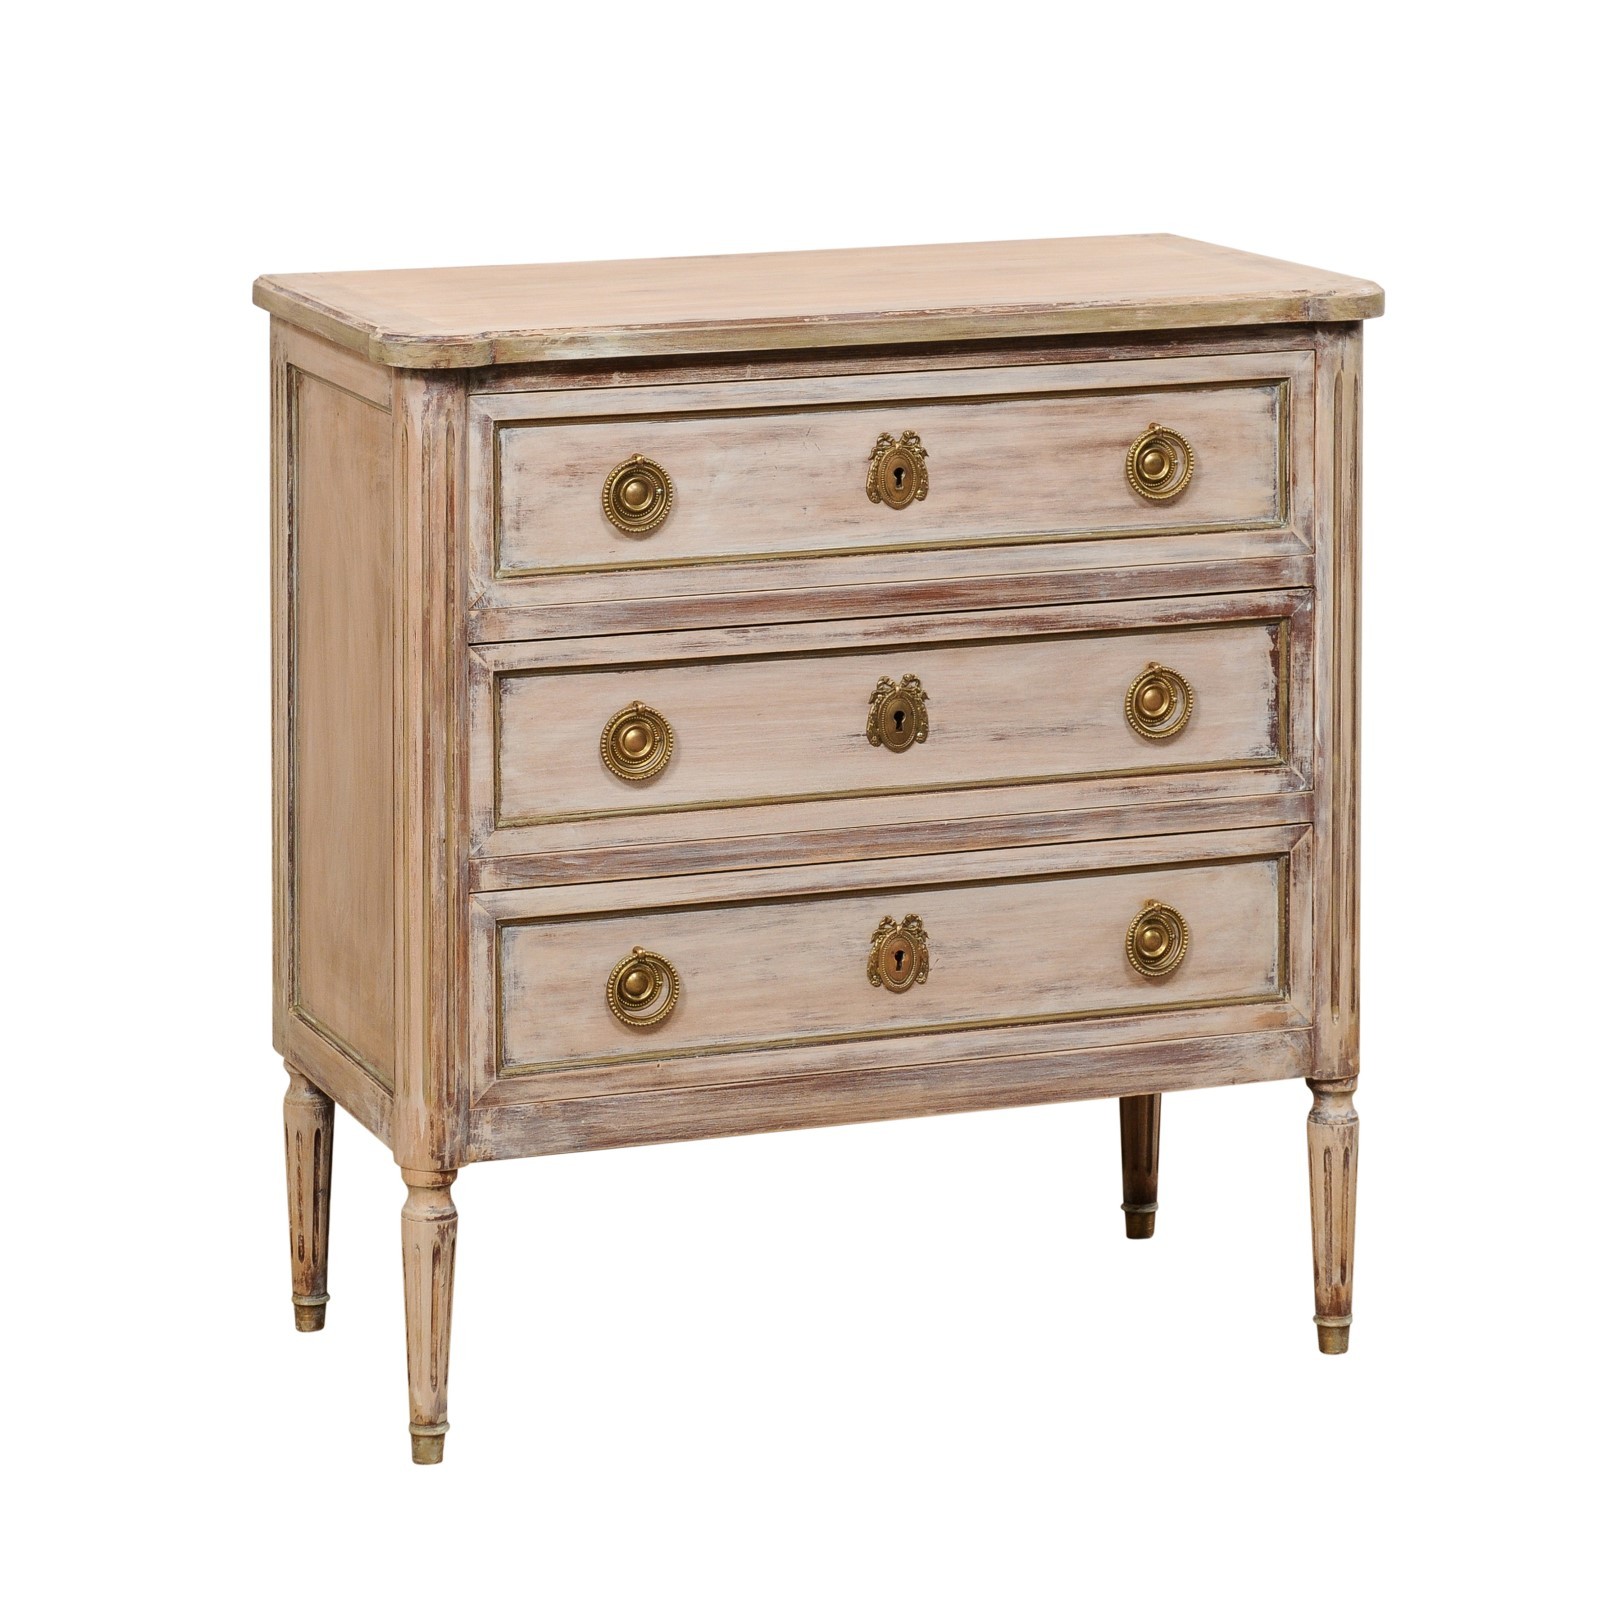 French Neoclassical Style Painted Commode